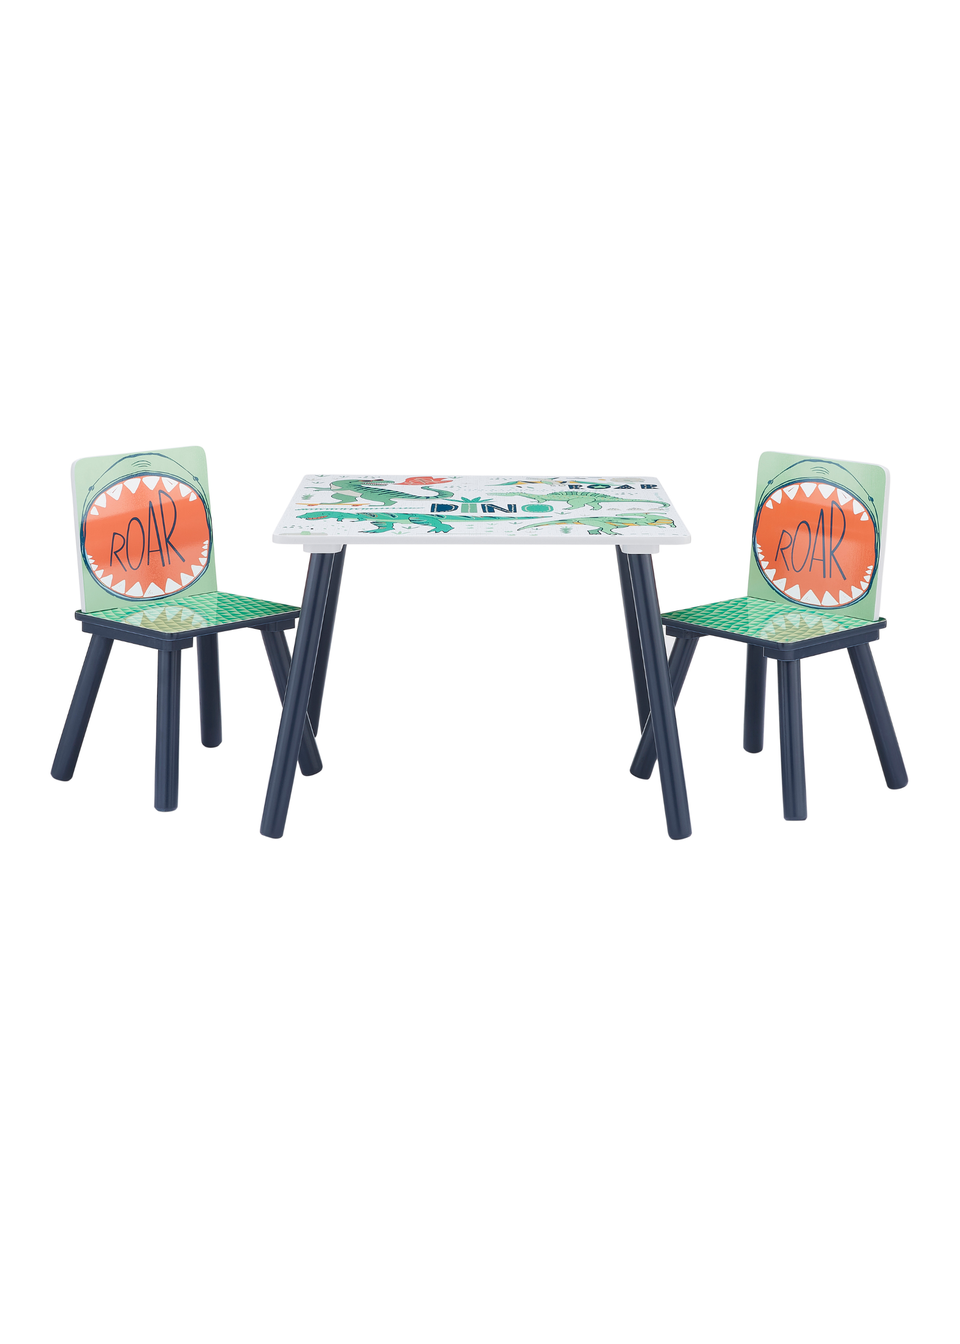 Lloyd Pascal Kids Dino Table and Chairs Set